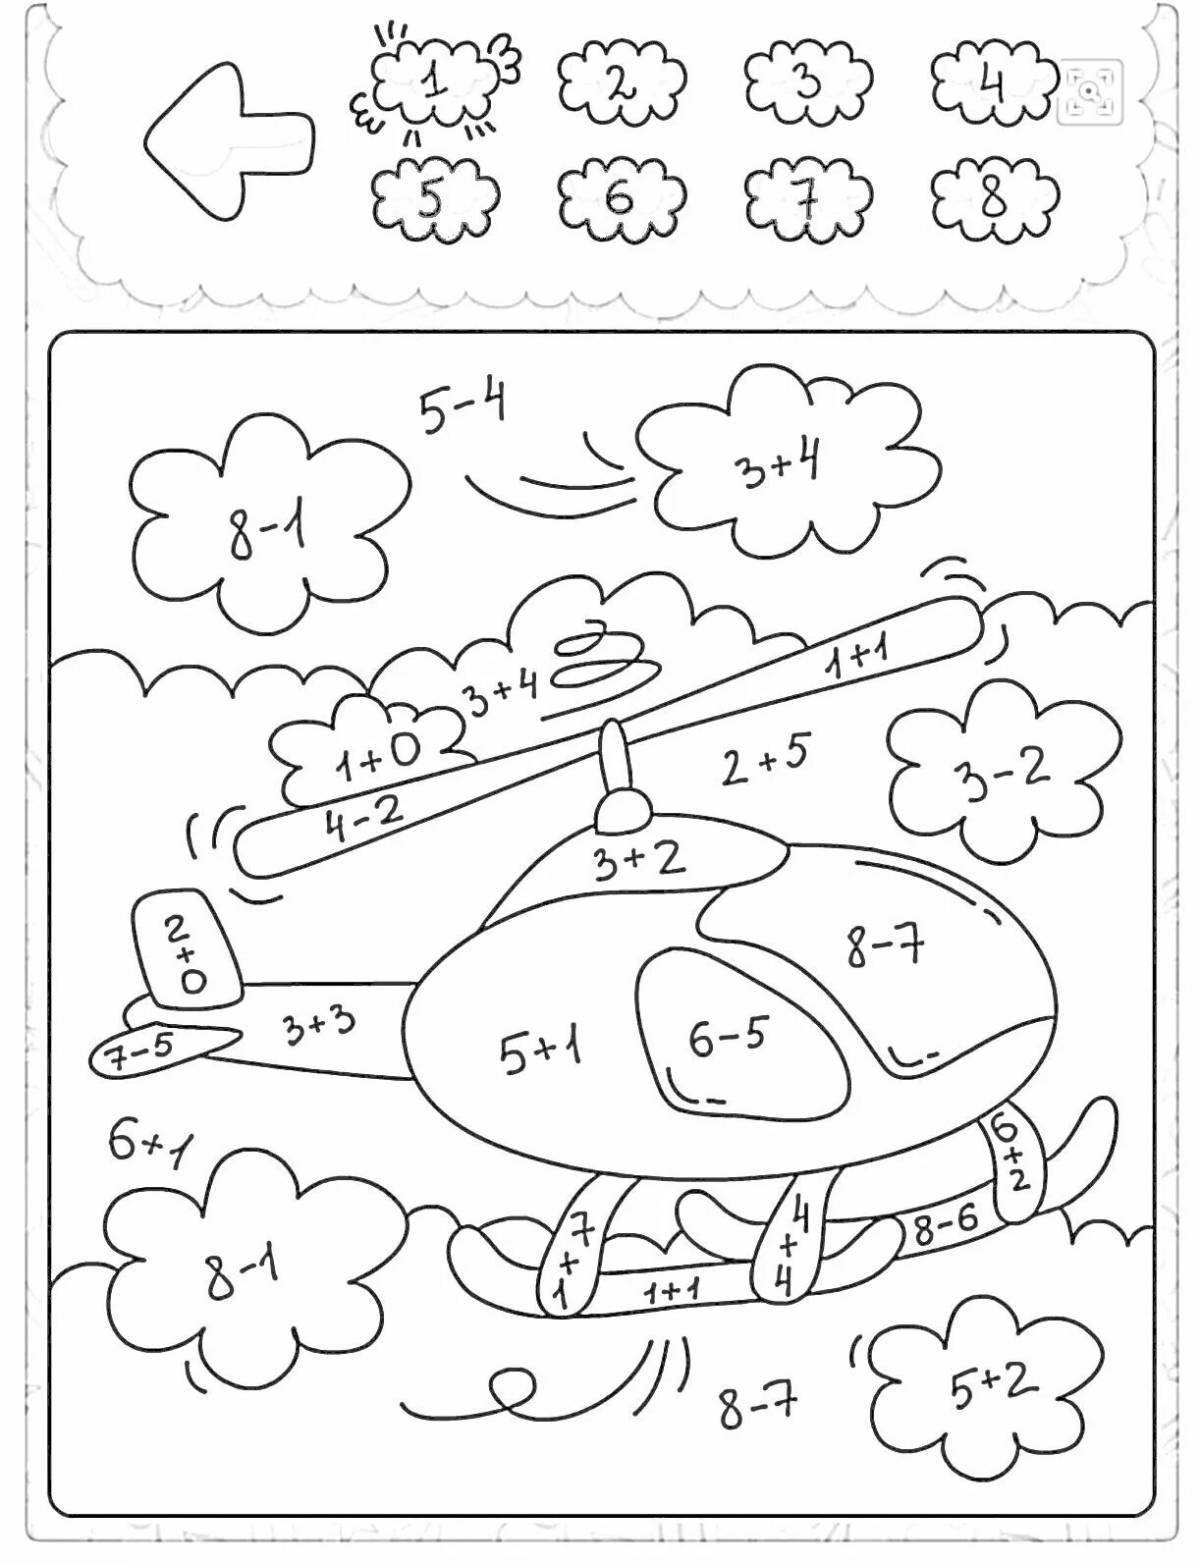 Color score up to 10 coloring pages for preschoolers